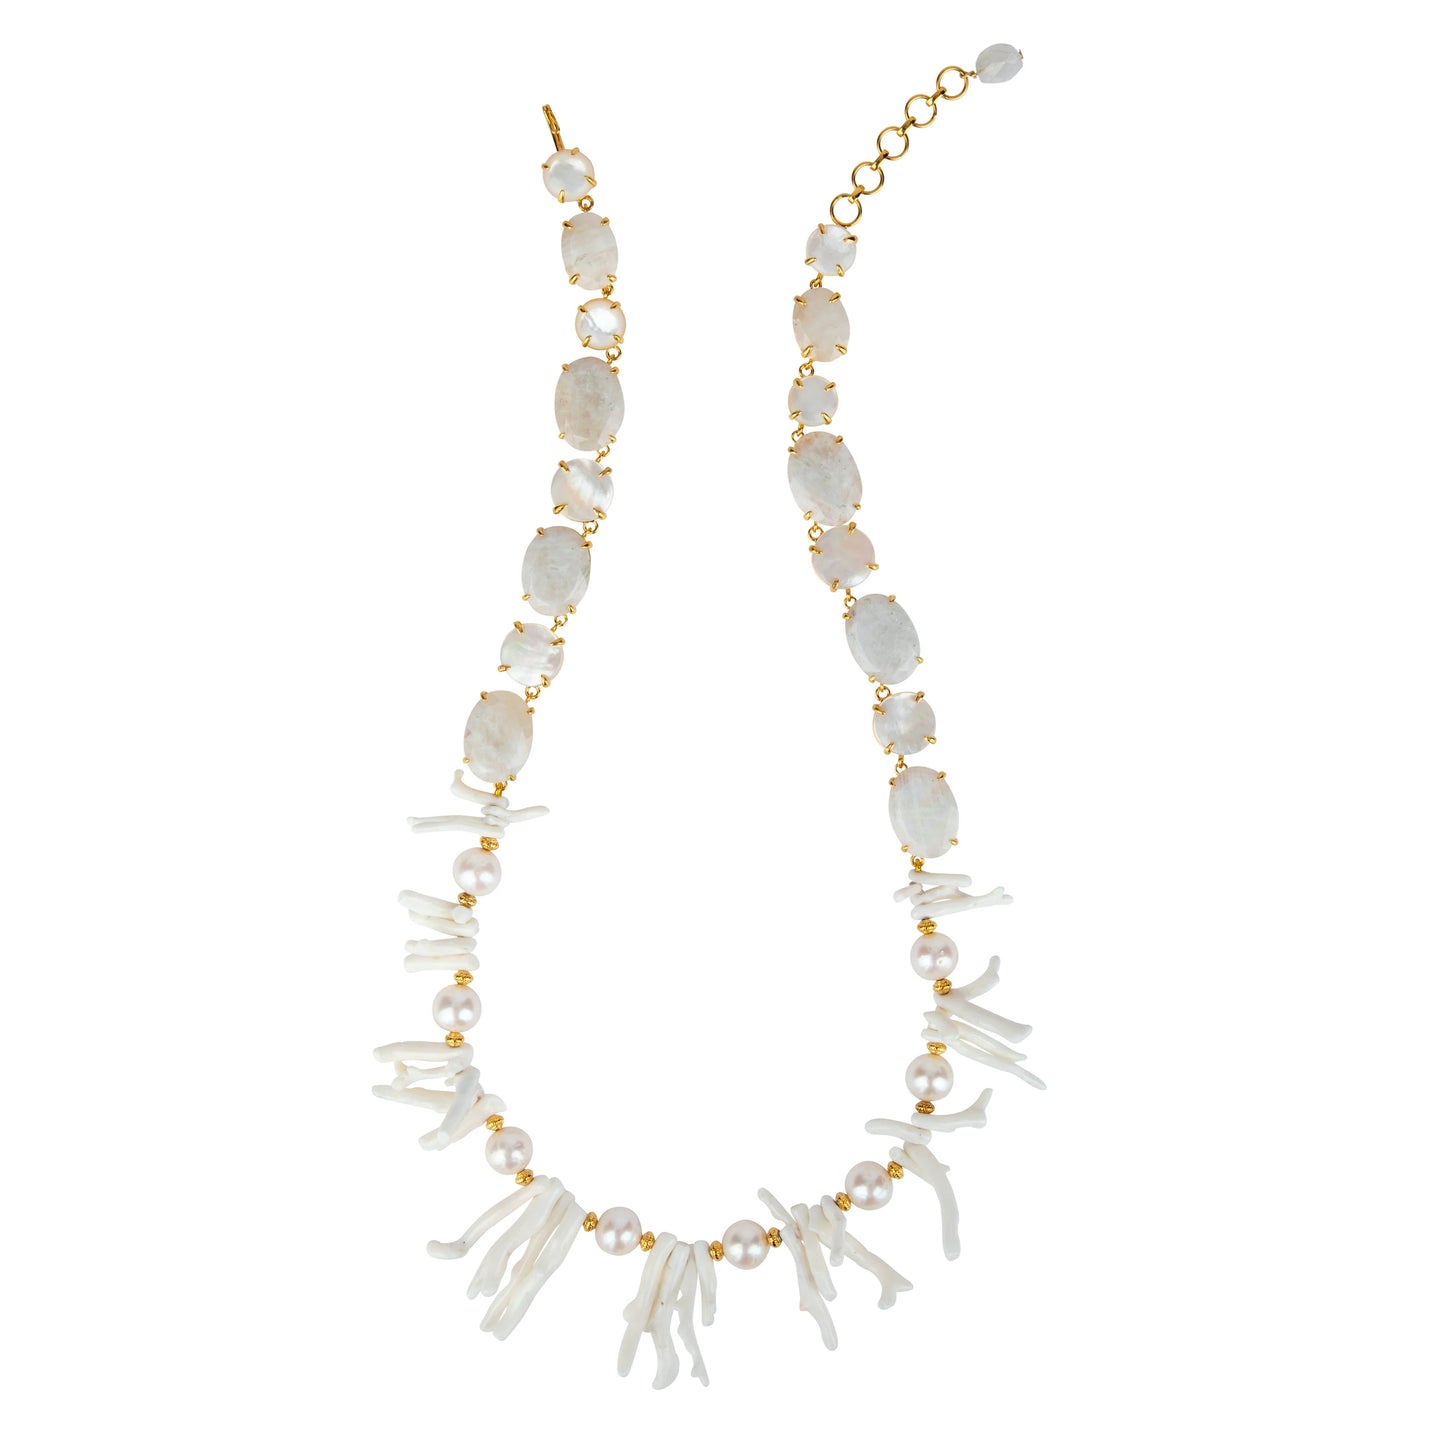 Moonstone, Pearl & Coral Necklace